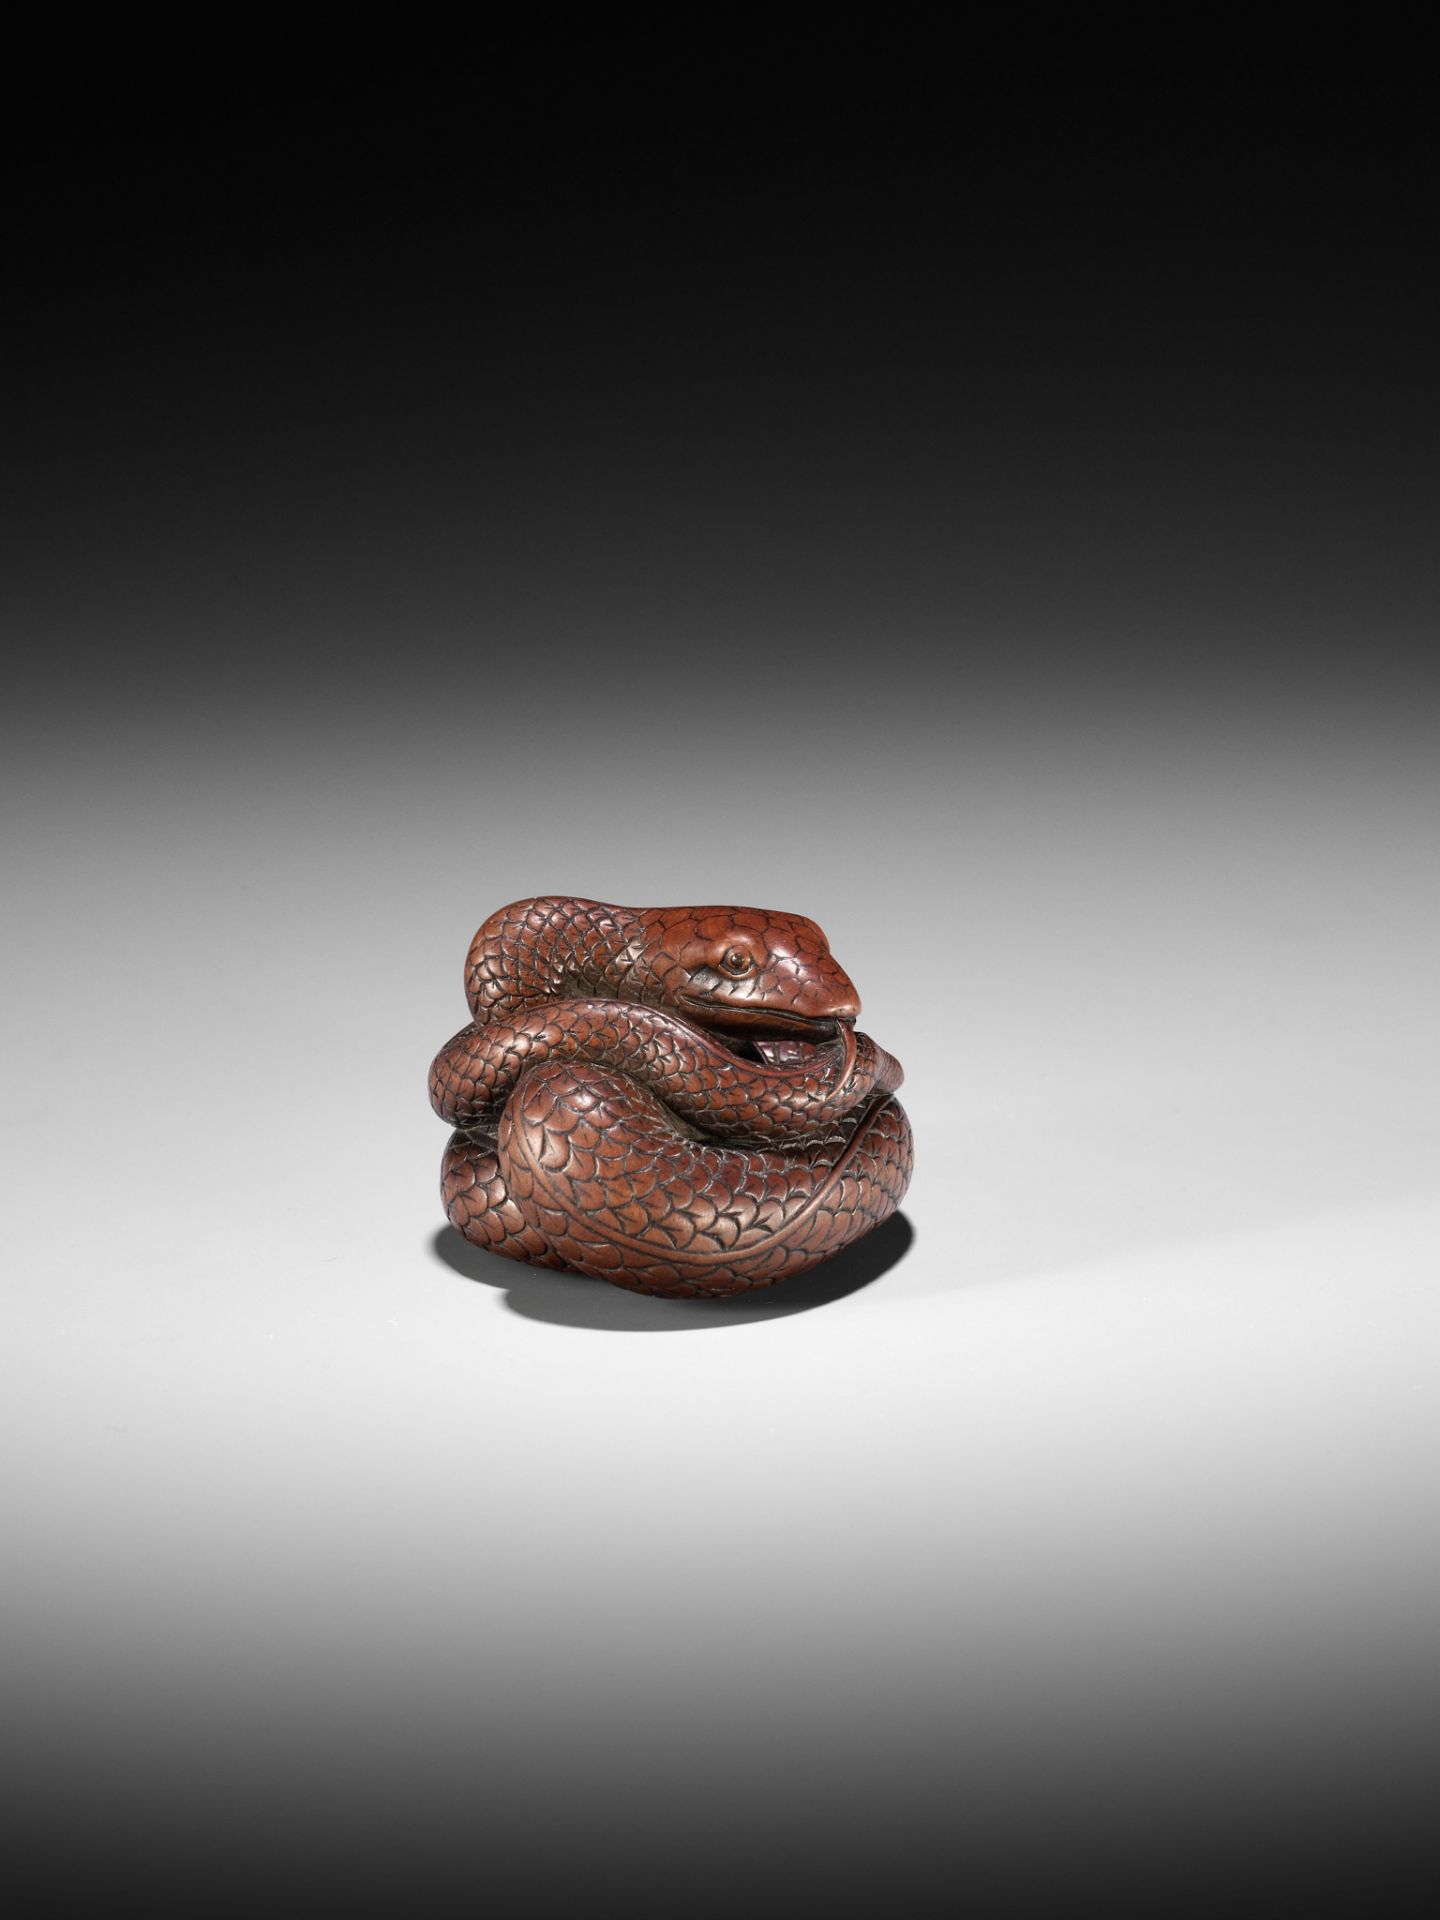 AN EXCEPTIONAL AND LARGE WOOD NETSUKE OF A SNAKE, ATTRIBUTED TO OKATOMO - Image 13 of 19